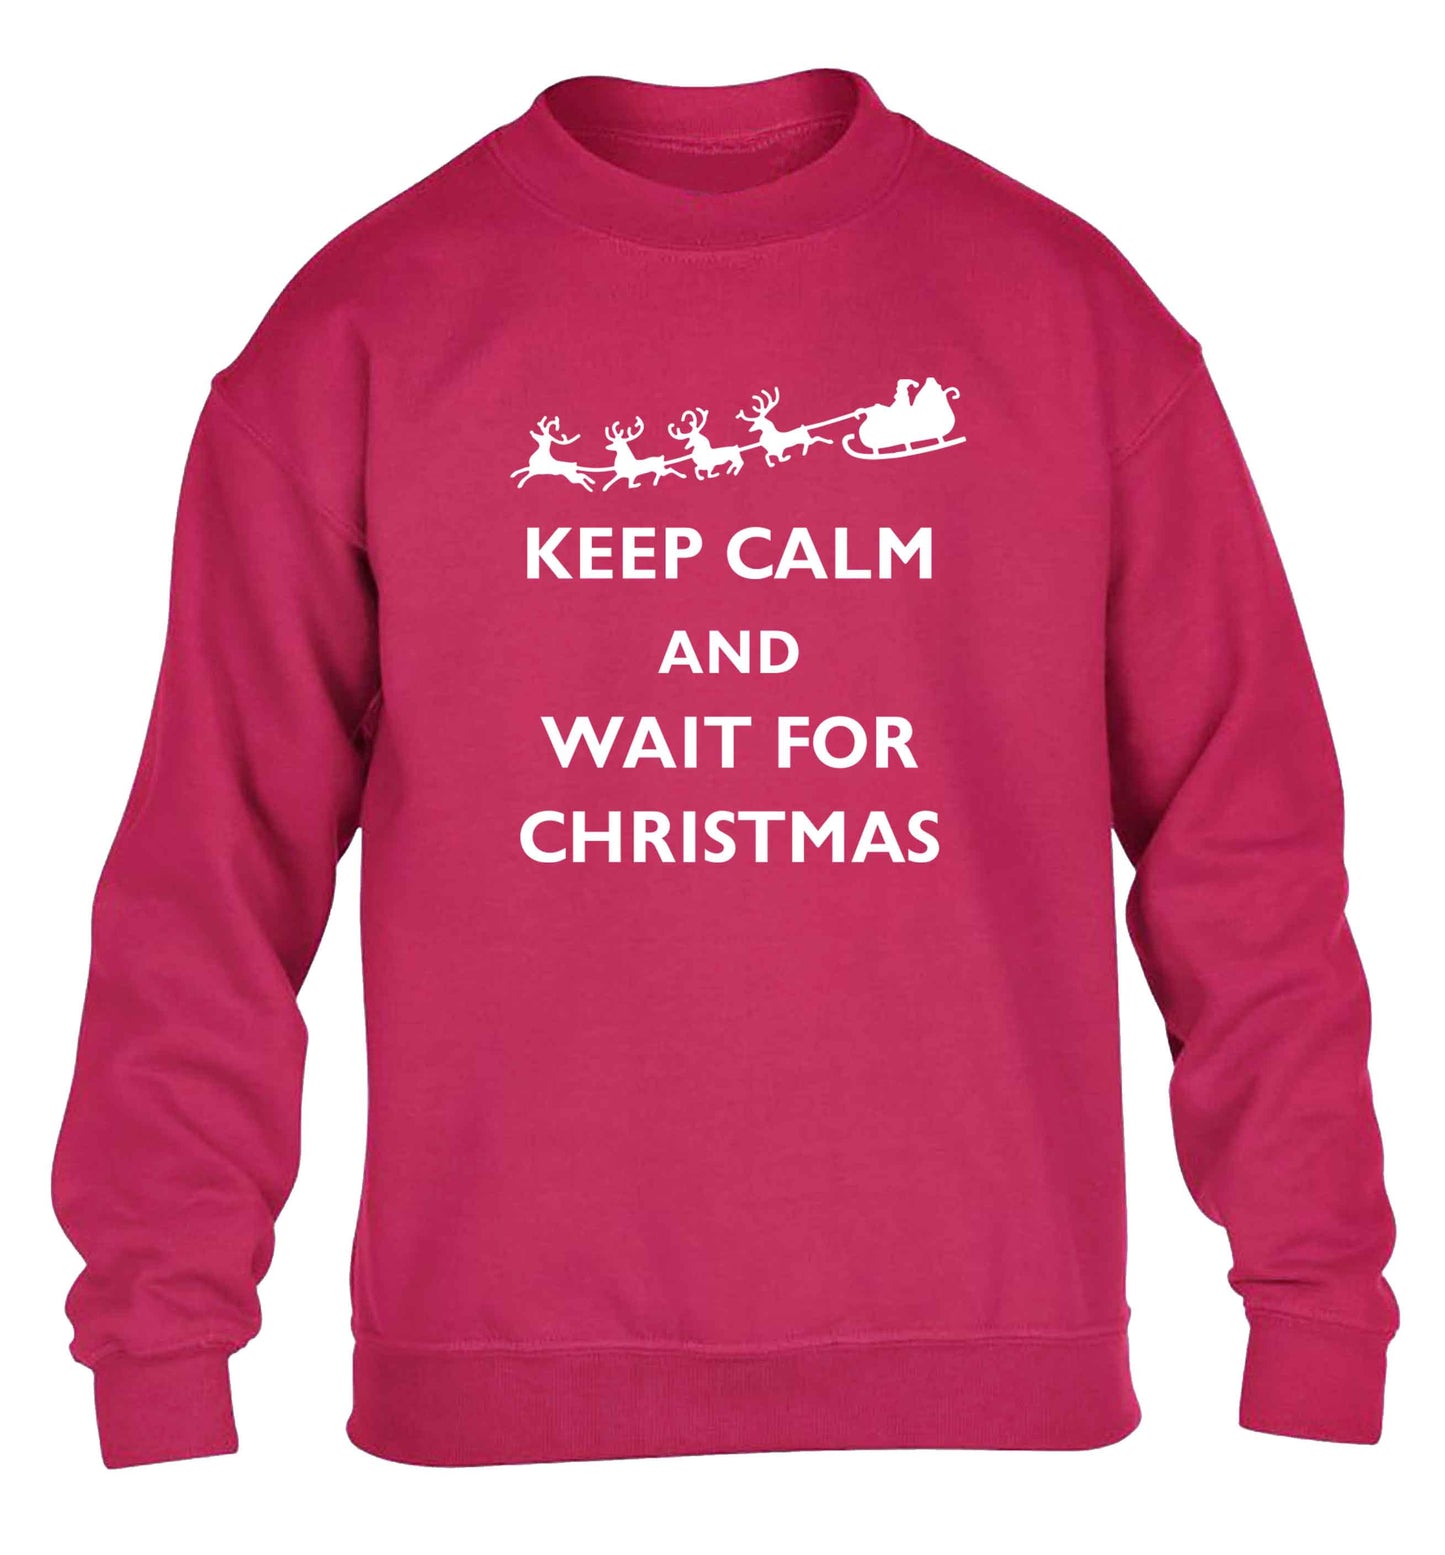 Keep calm and wait for Christmas children's pink sweater 12-13 Years